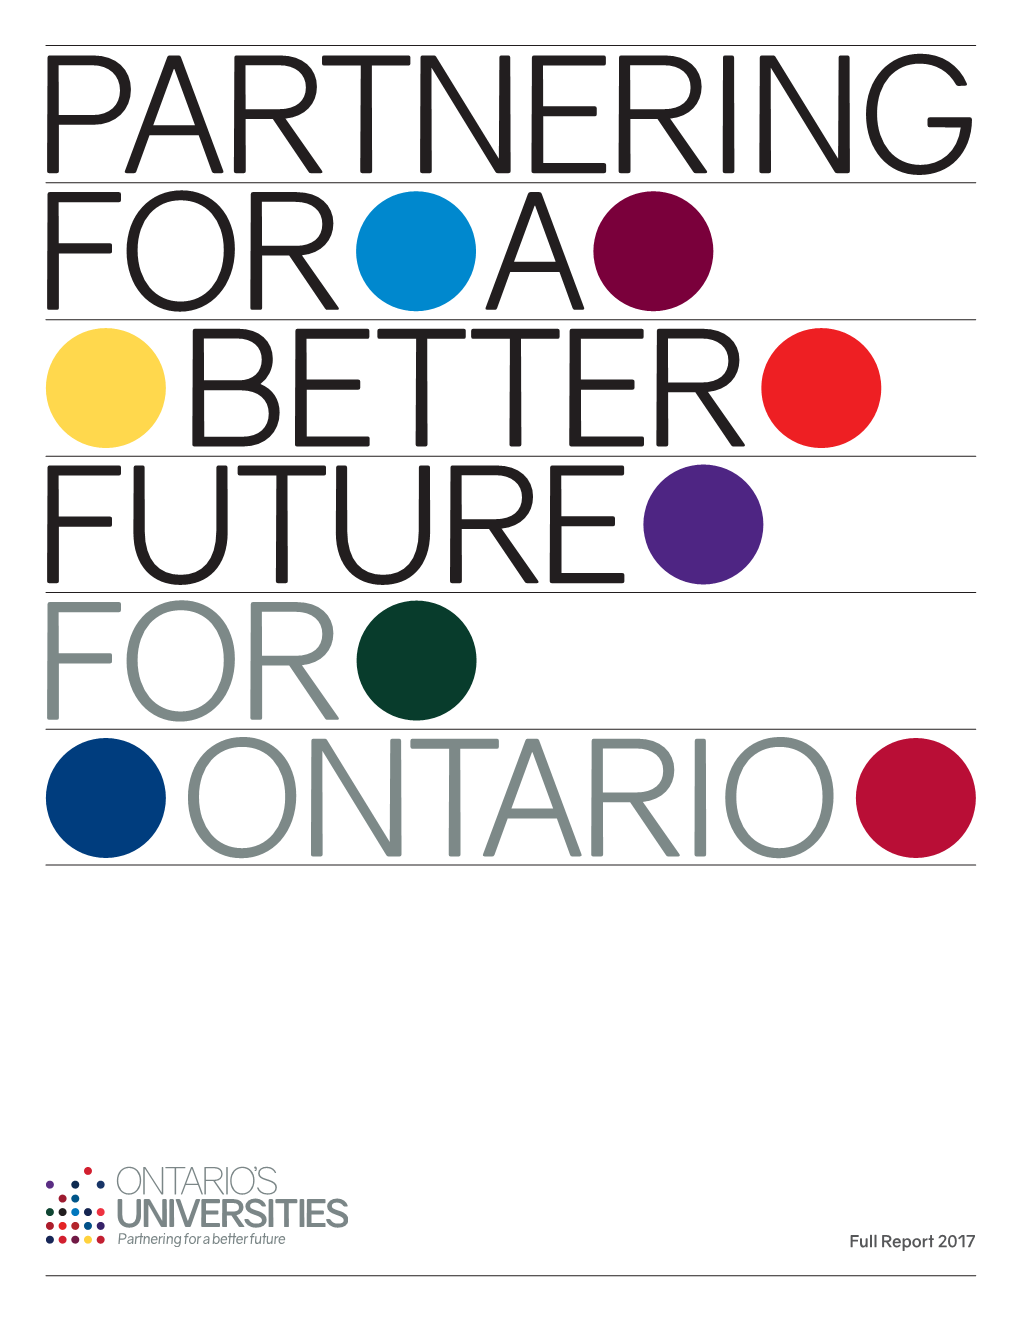 Partnering for a Better Future for Ontario